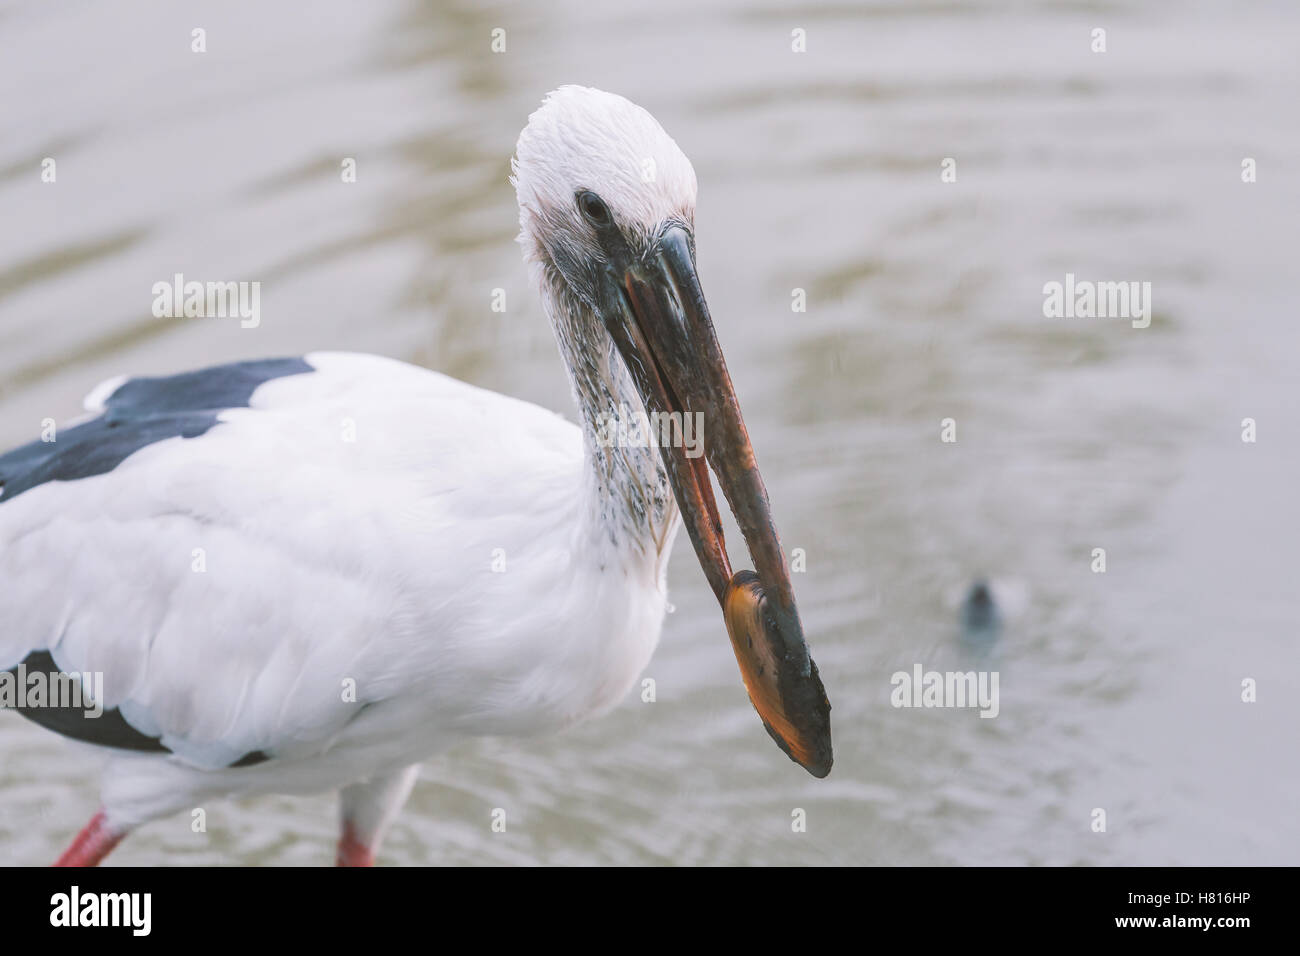 Close focus on head of white bird called Asian Openbill or Open billed stork. Bird catch shellfish from mud water. Stock Photo